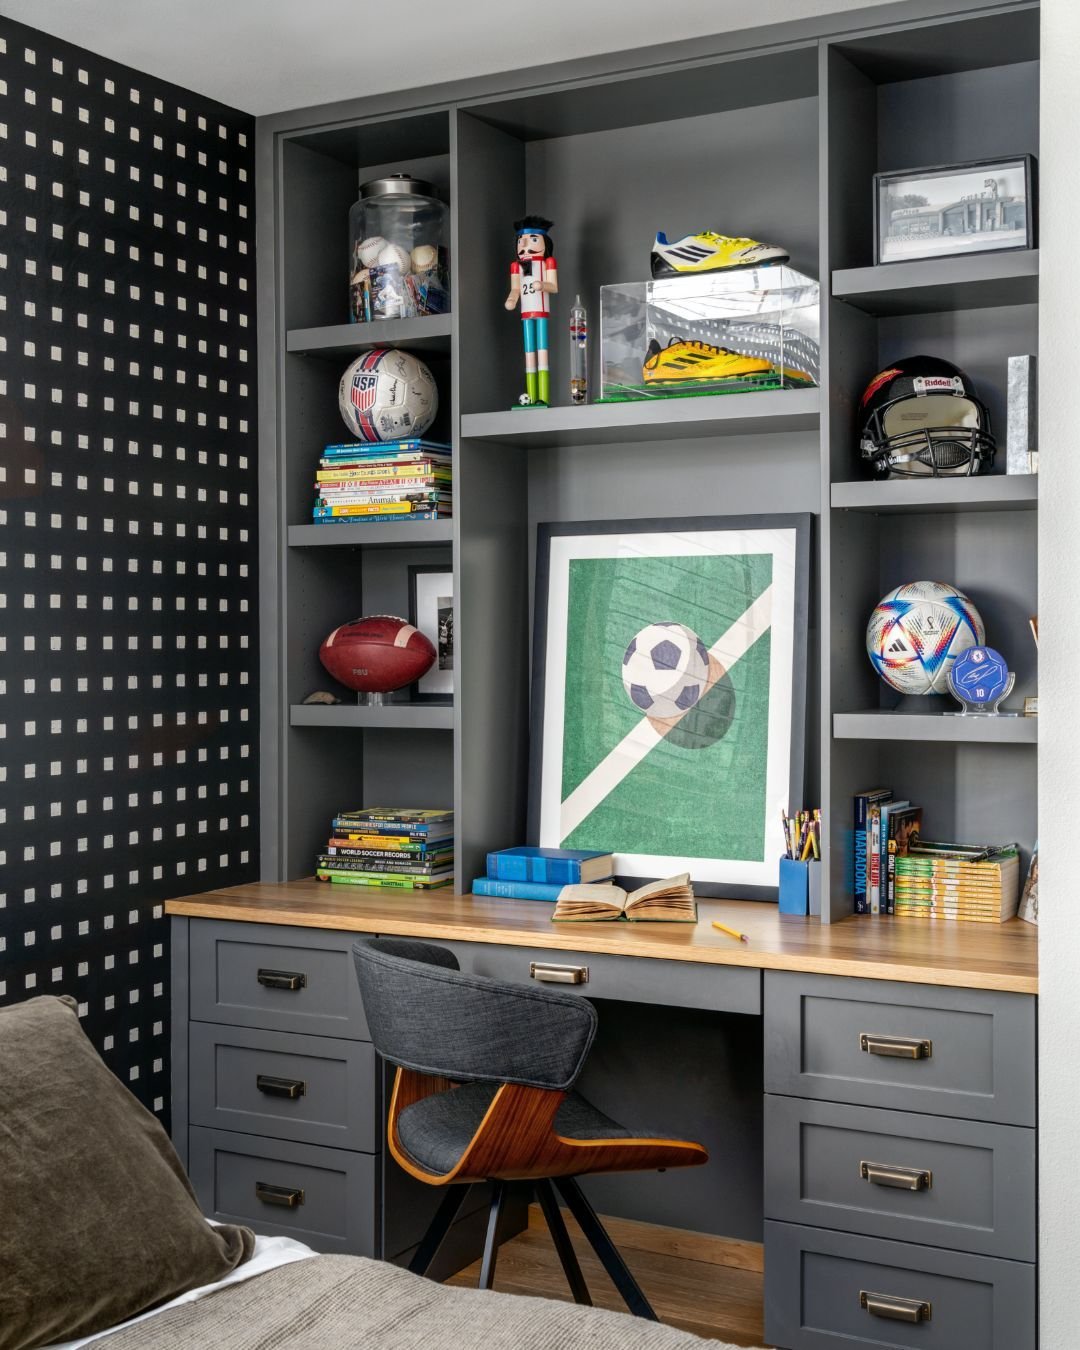 We've all come across a &quot;man-cave&quot; at one point or another. This is our take on a sports-enthusiasts den that replaces kitschy with effortlessly cool 🖤 

For this boys' bedroom, we wanted to elevate the way sports memorabilia is traditiona